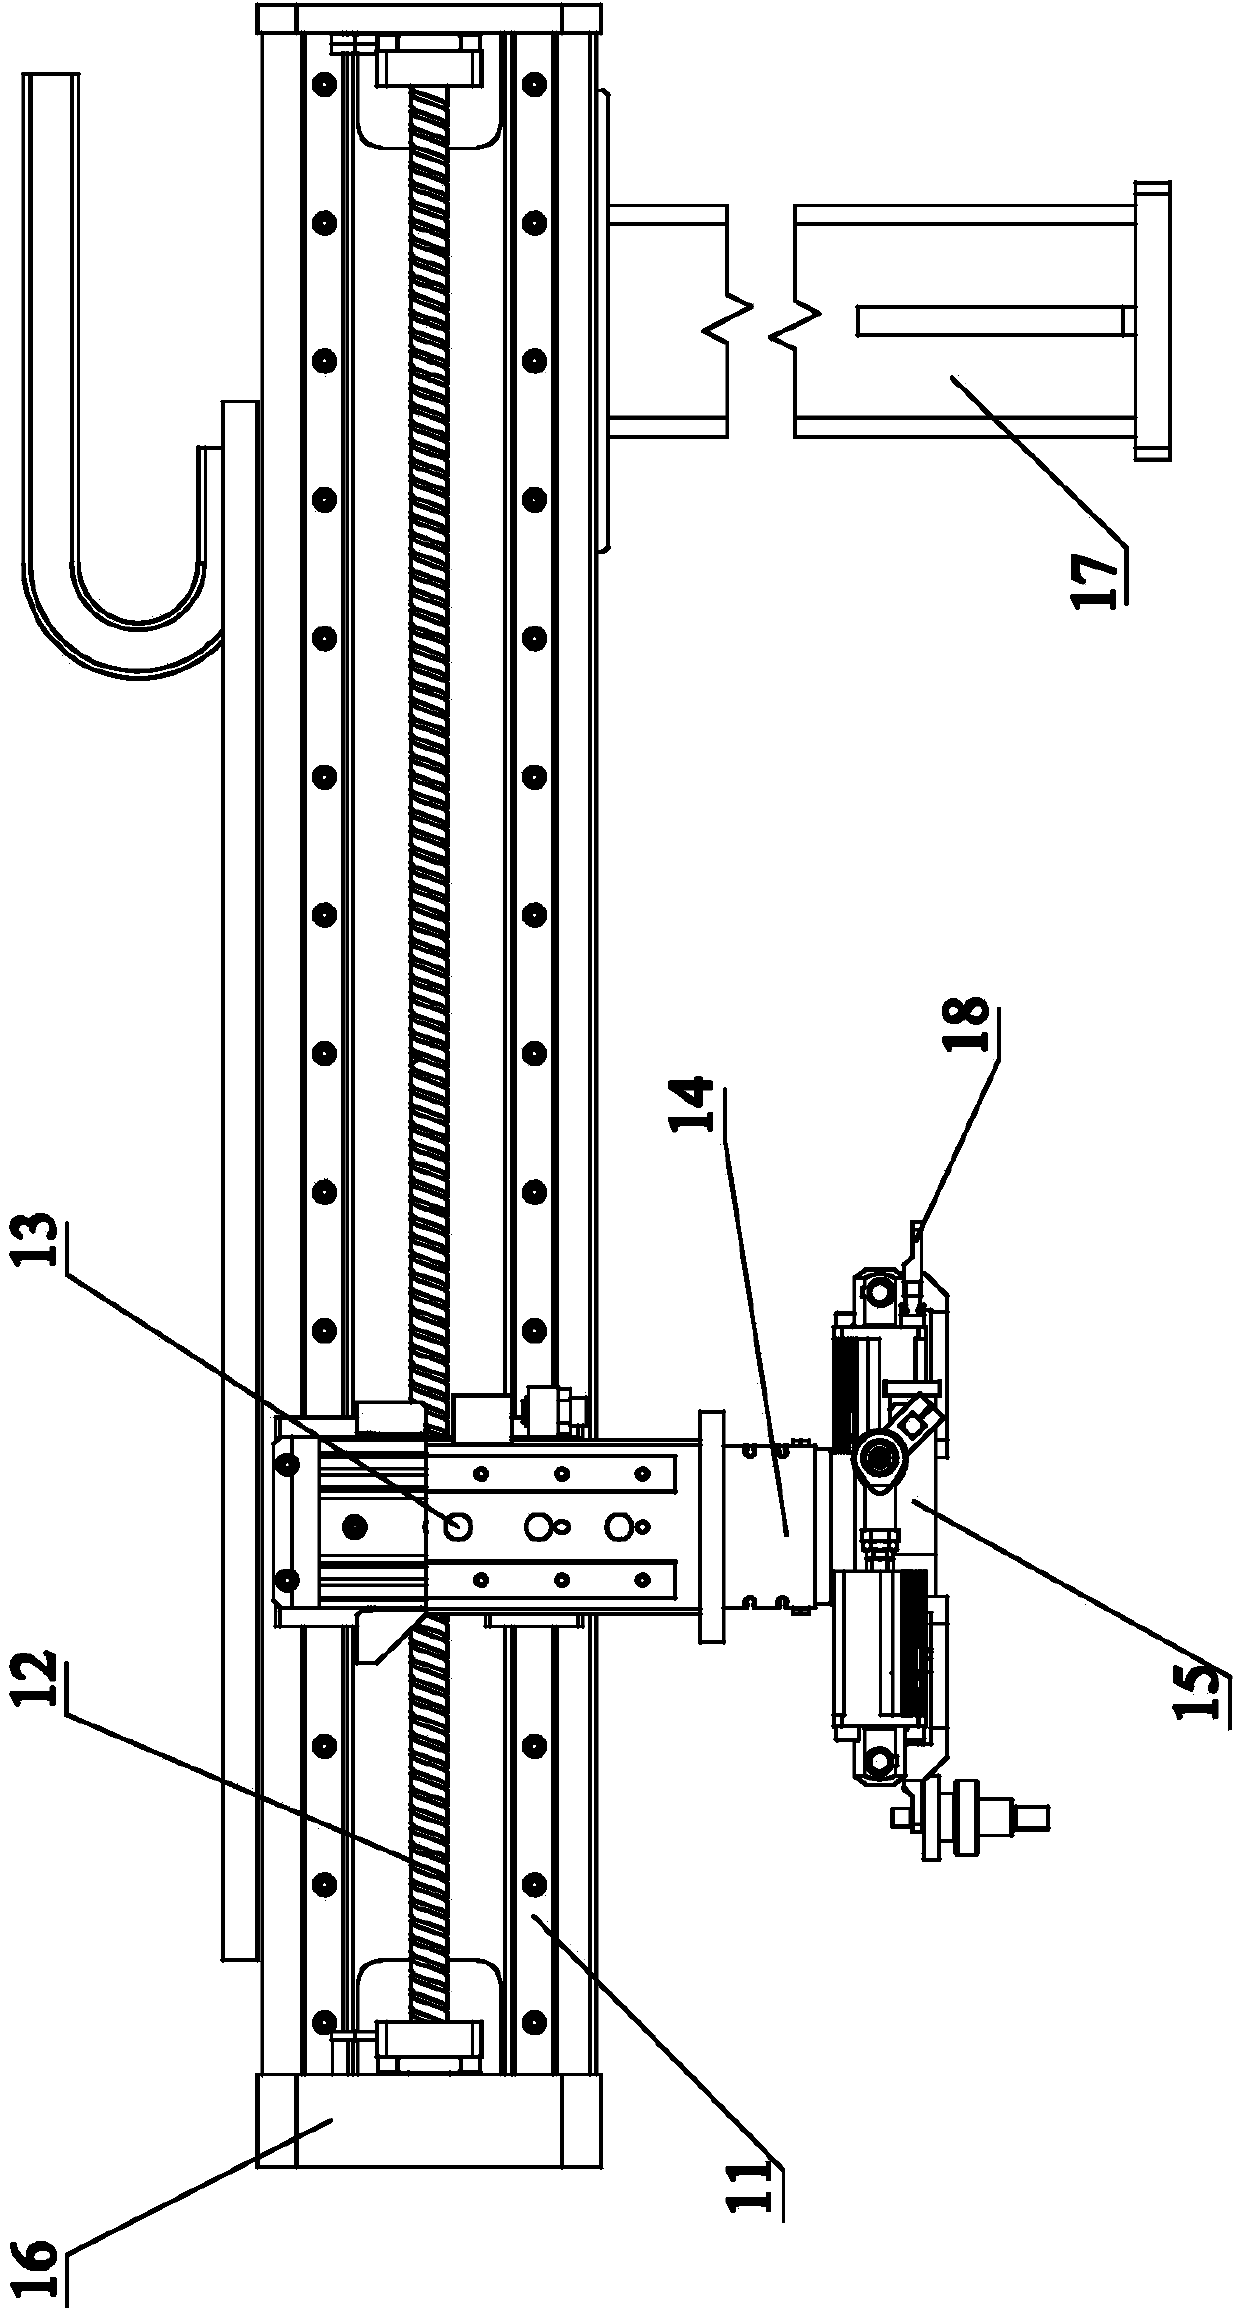 Electric tool gear assembly assembling system